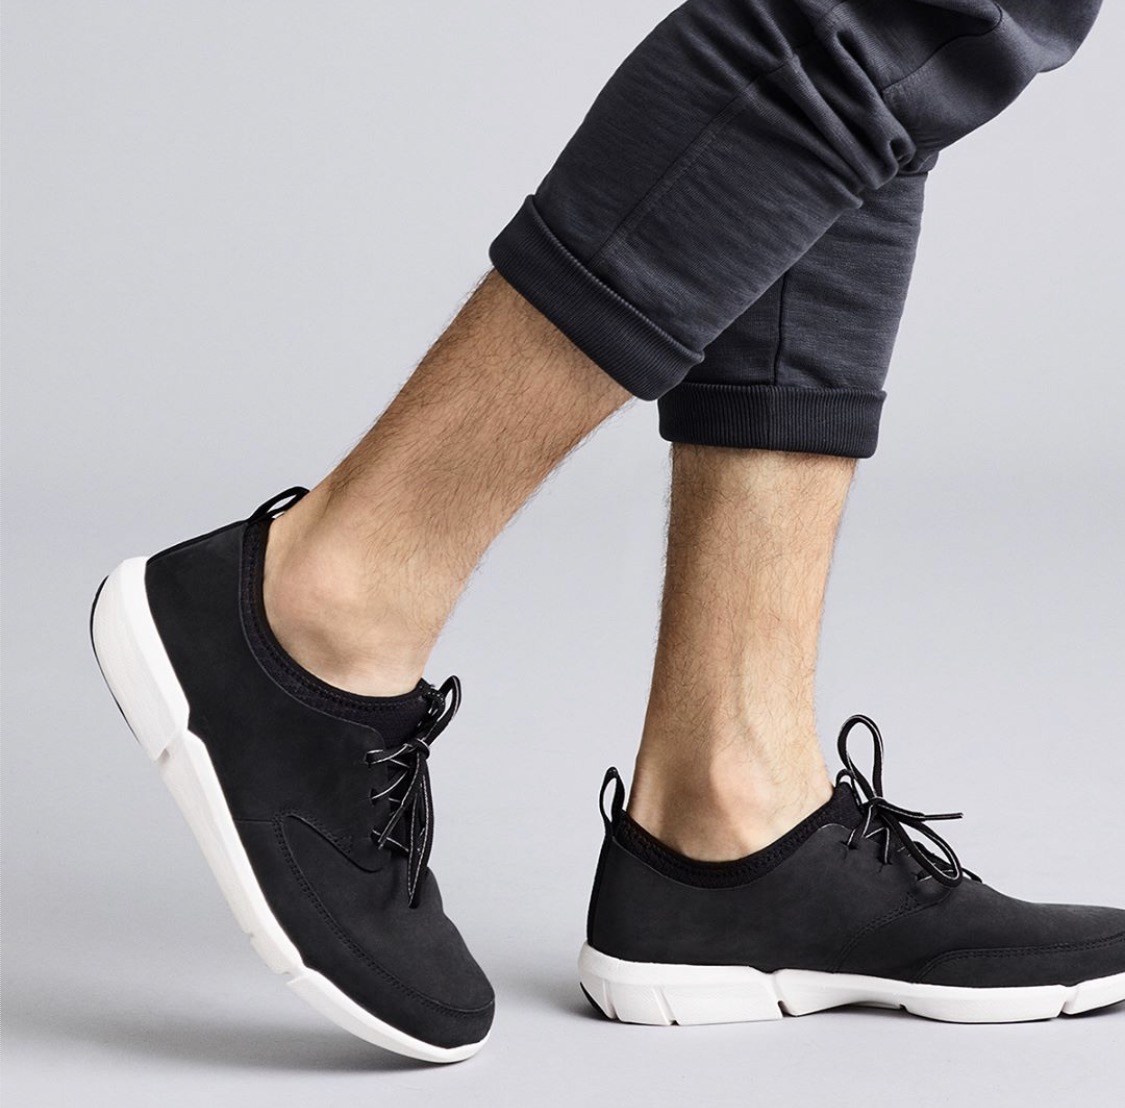 Shoes Introduces New Athleisure Collection For Men - Magazine